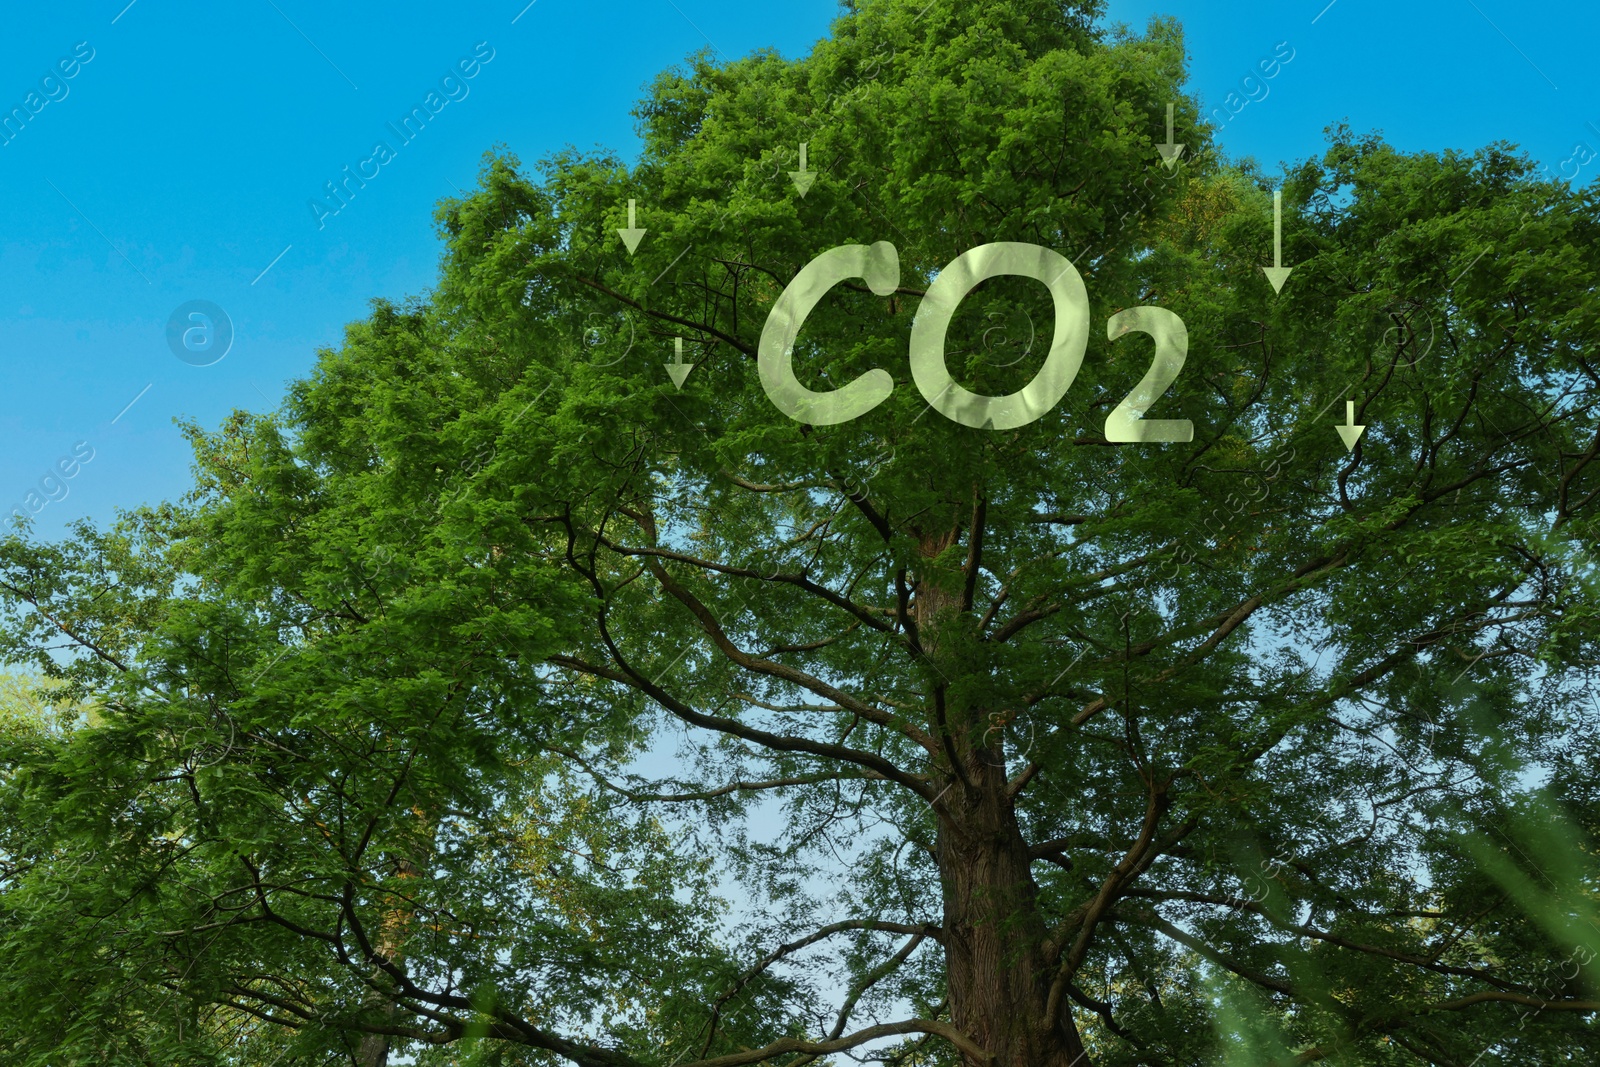 Image of Reduce CO2 emissions. CO2 inscription with arrows and beautiful green tree under blue sky, low angle view